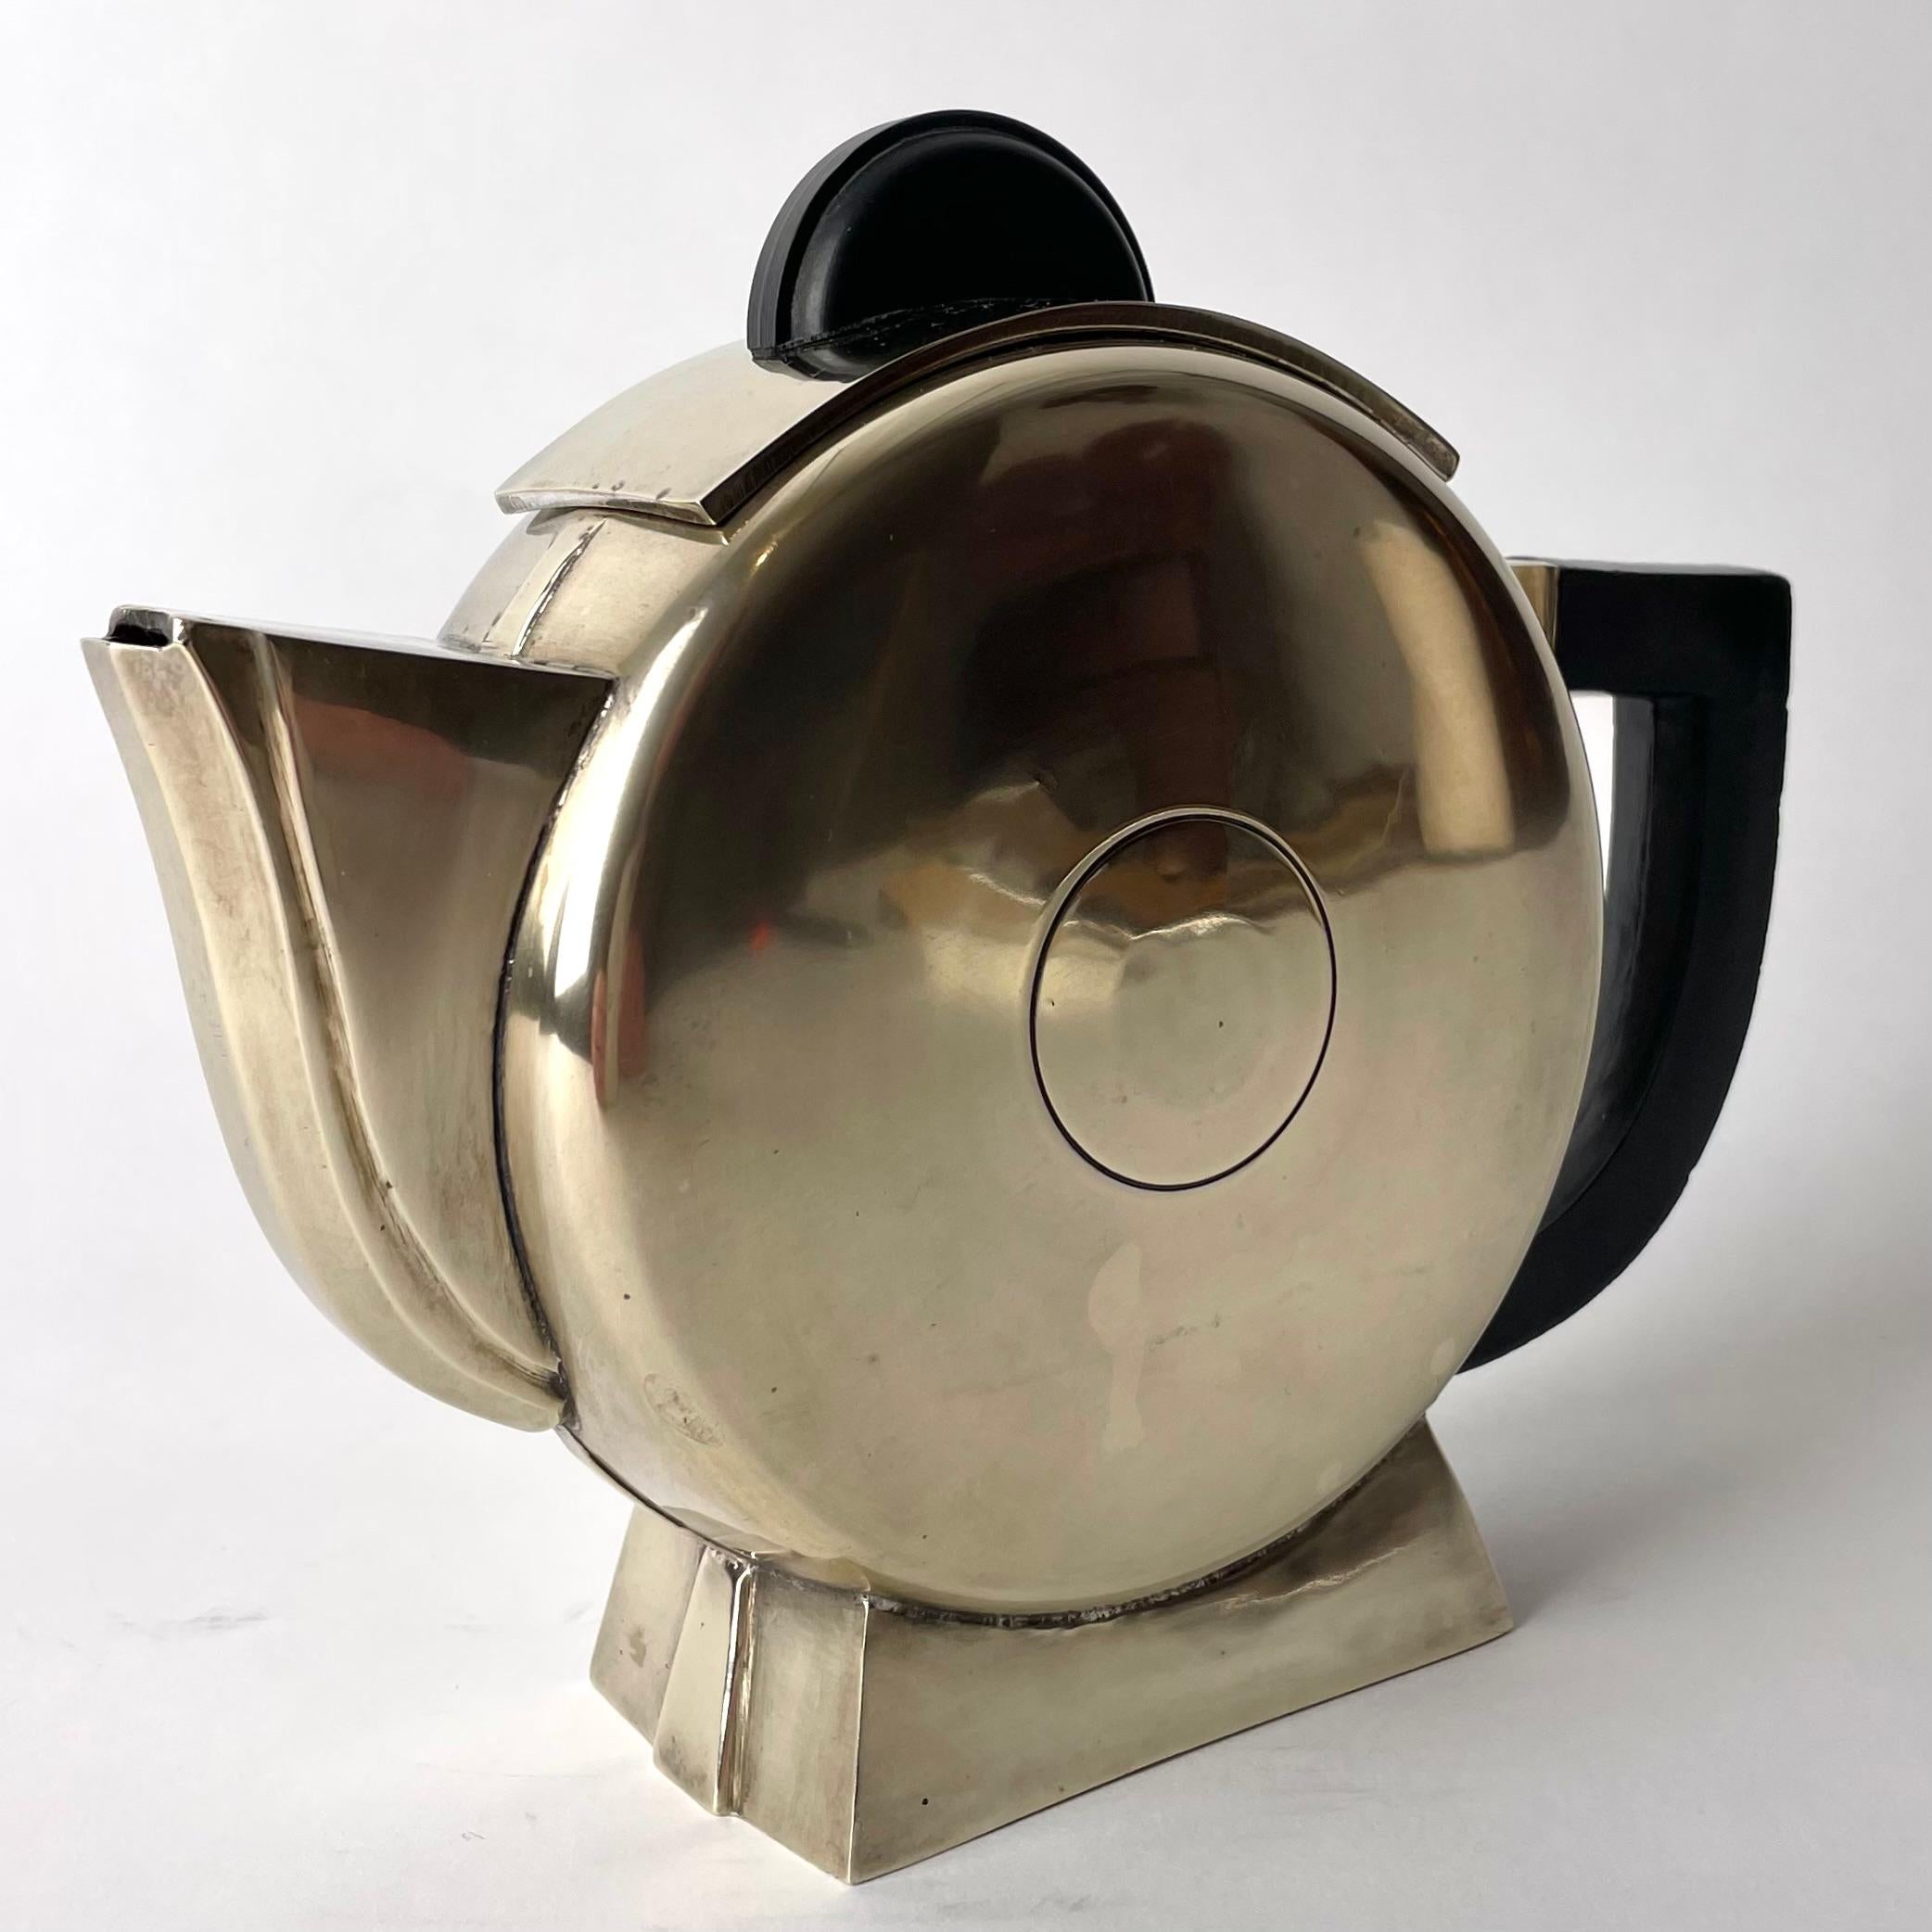 Very period Coffee Pot in extreme Art Deco, from the 1920s - 1930s. Made in  silver-plated white metal and with bakelite handles.

Wear consistent with age and use 